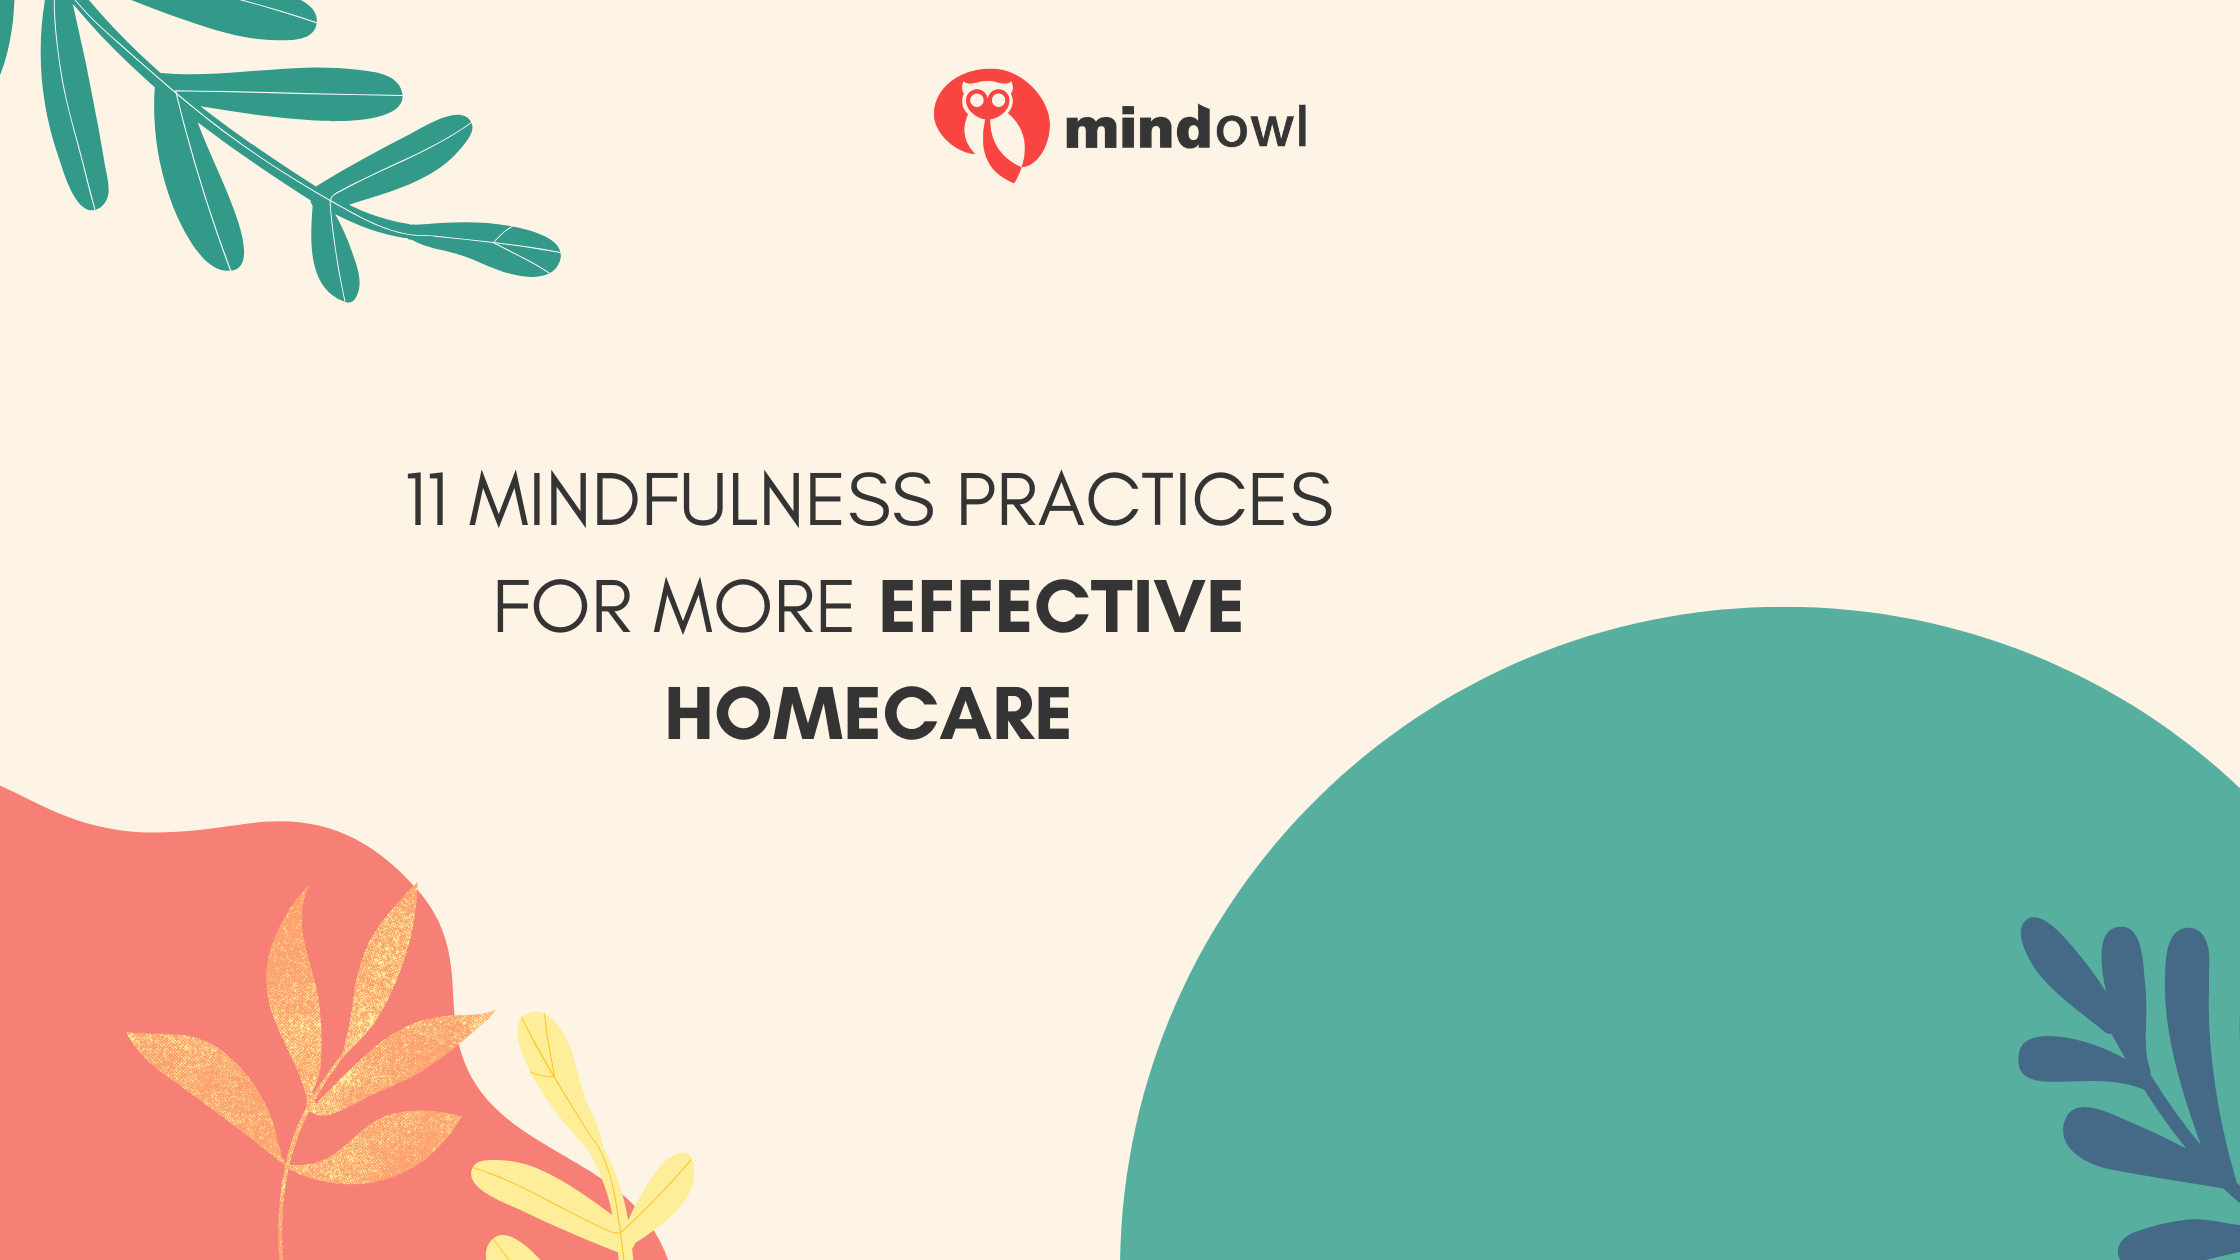 11 Mindfulness Practices for More Effective Homecare